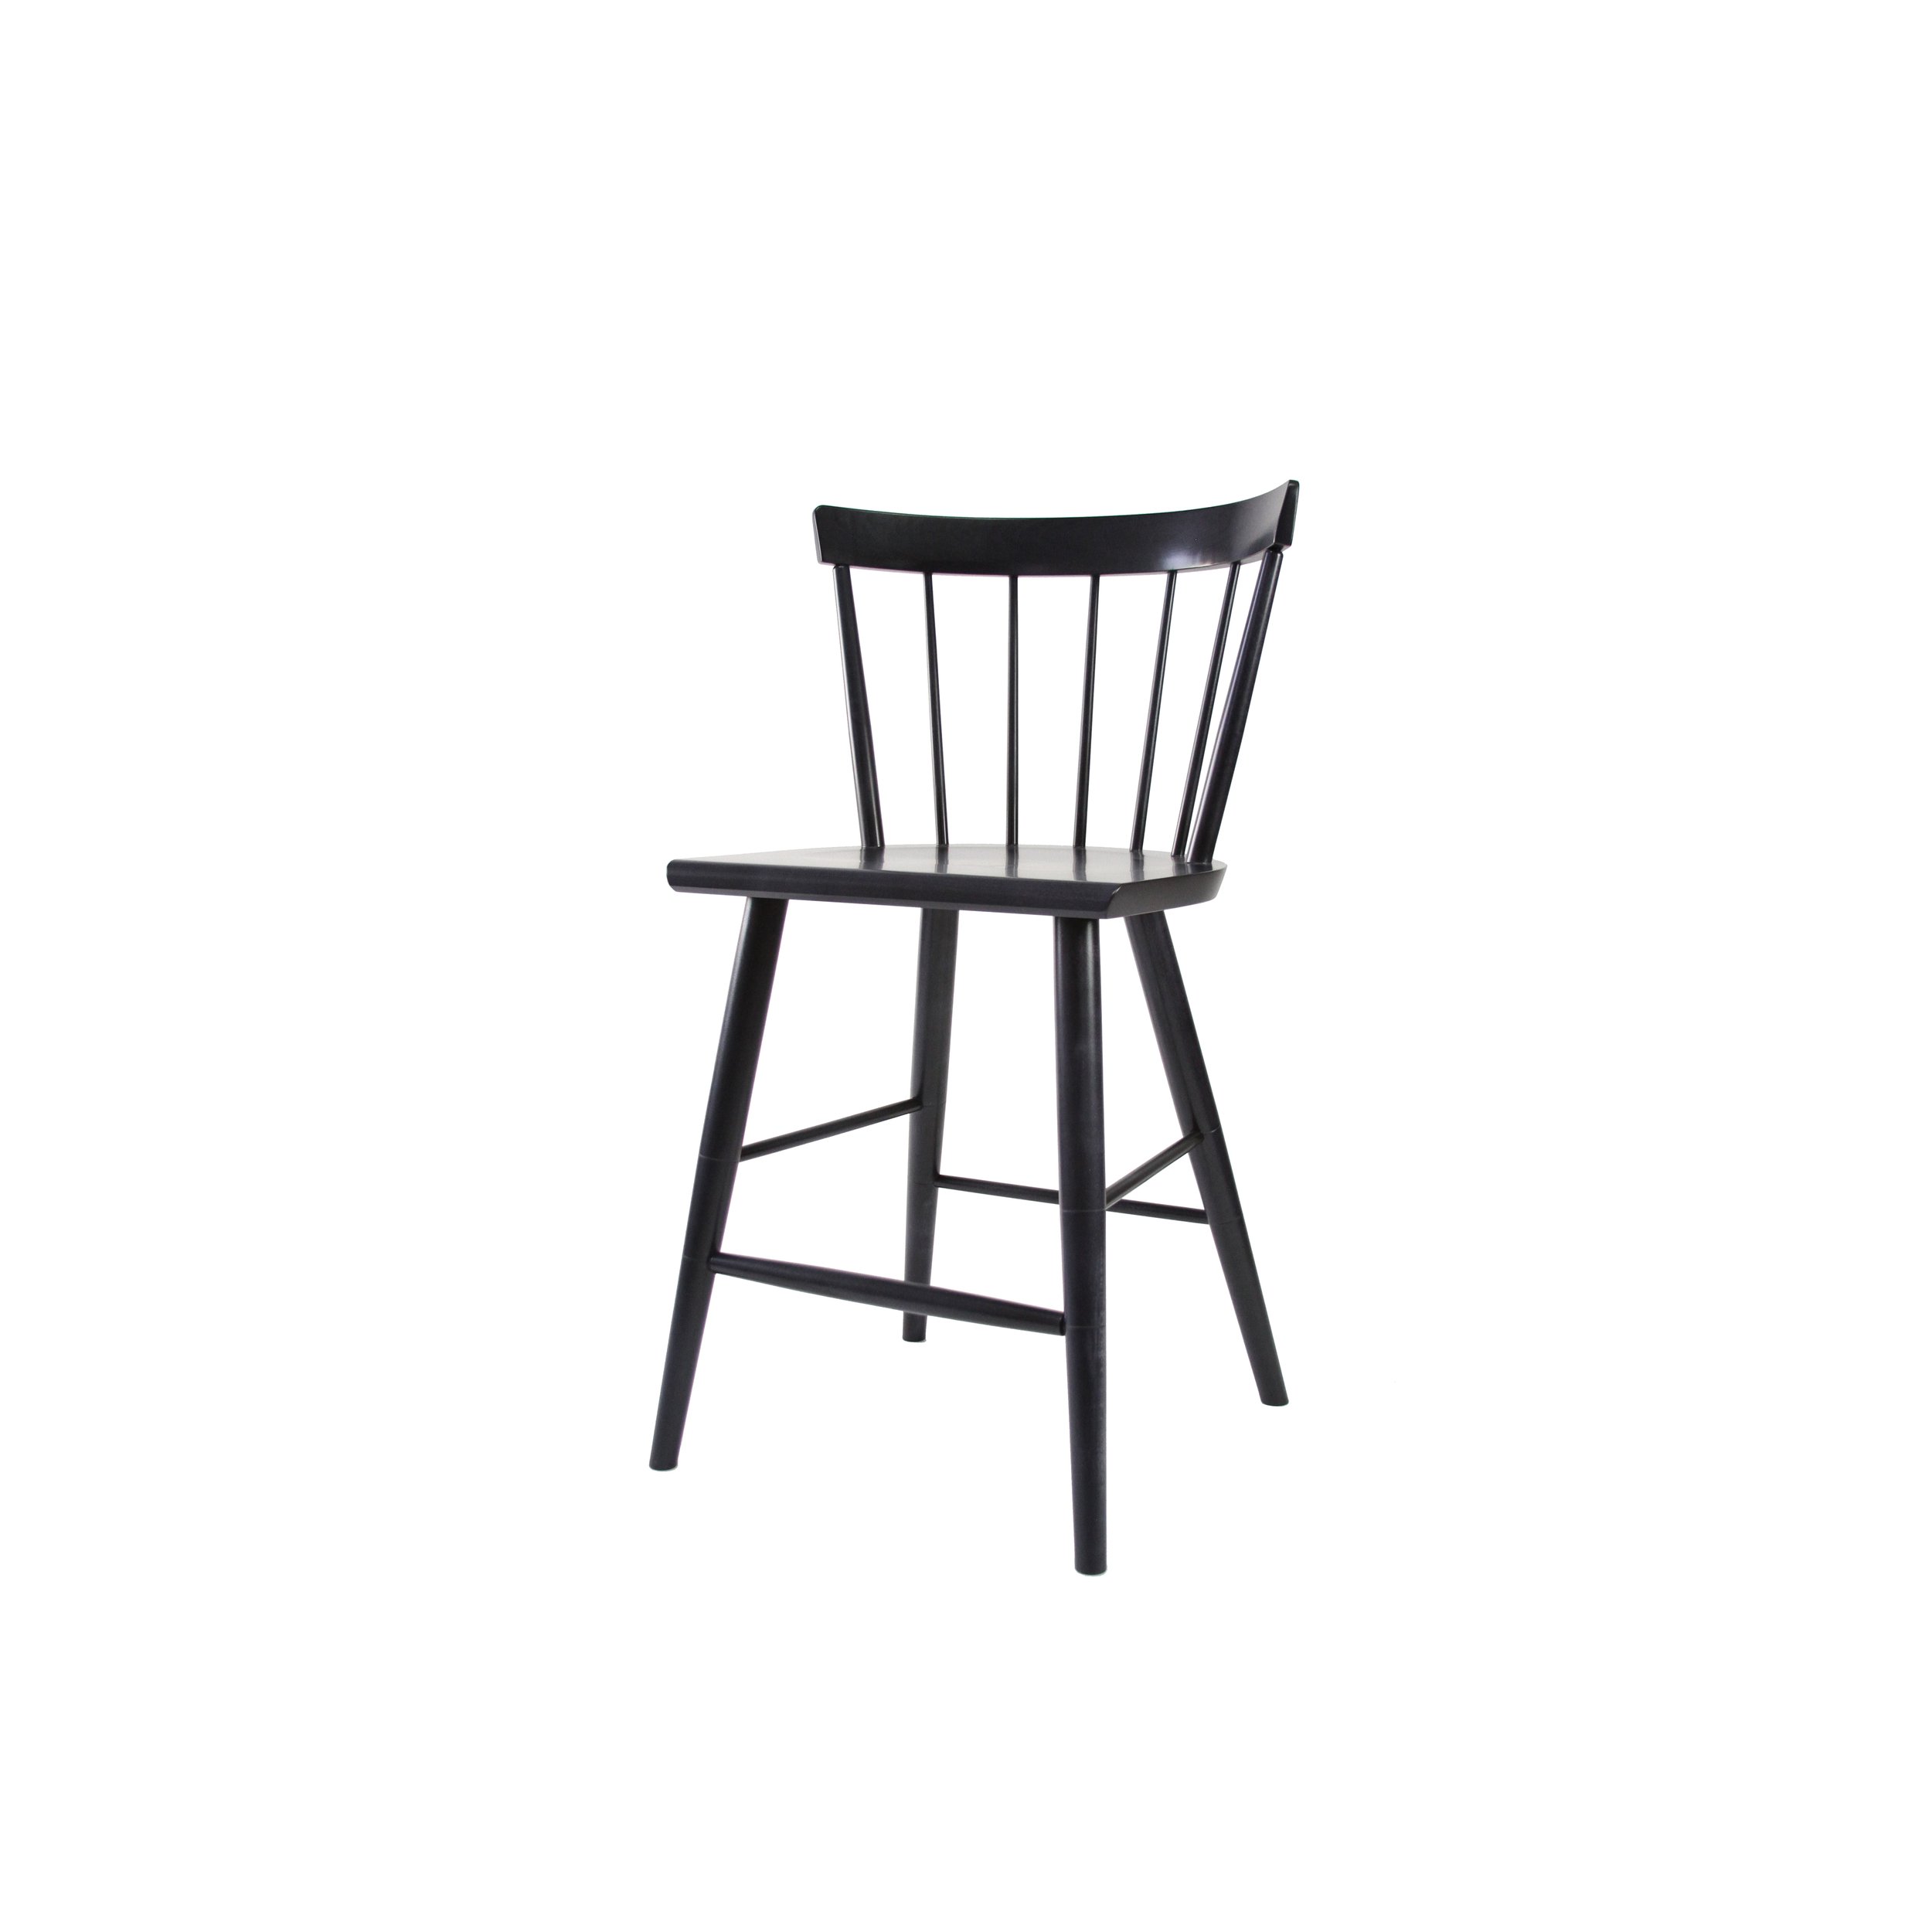 COLT COUNTER STOOL 24” - $1,245